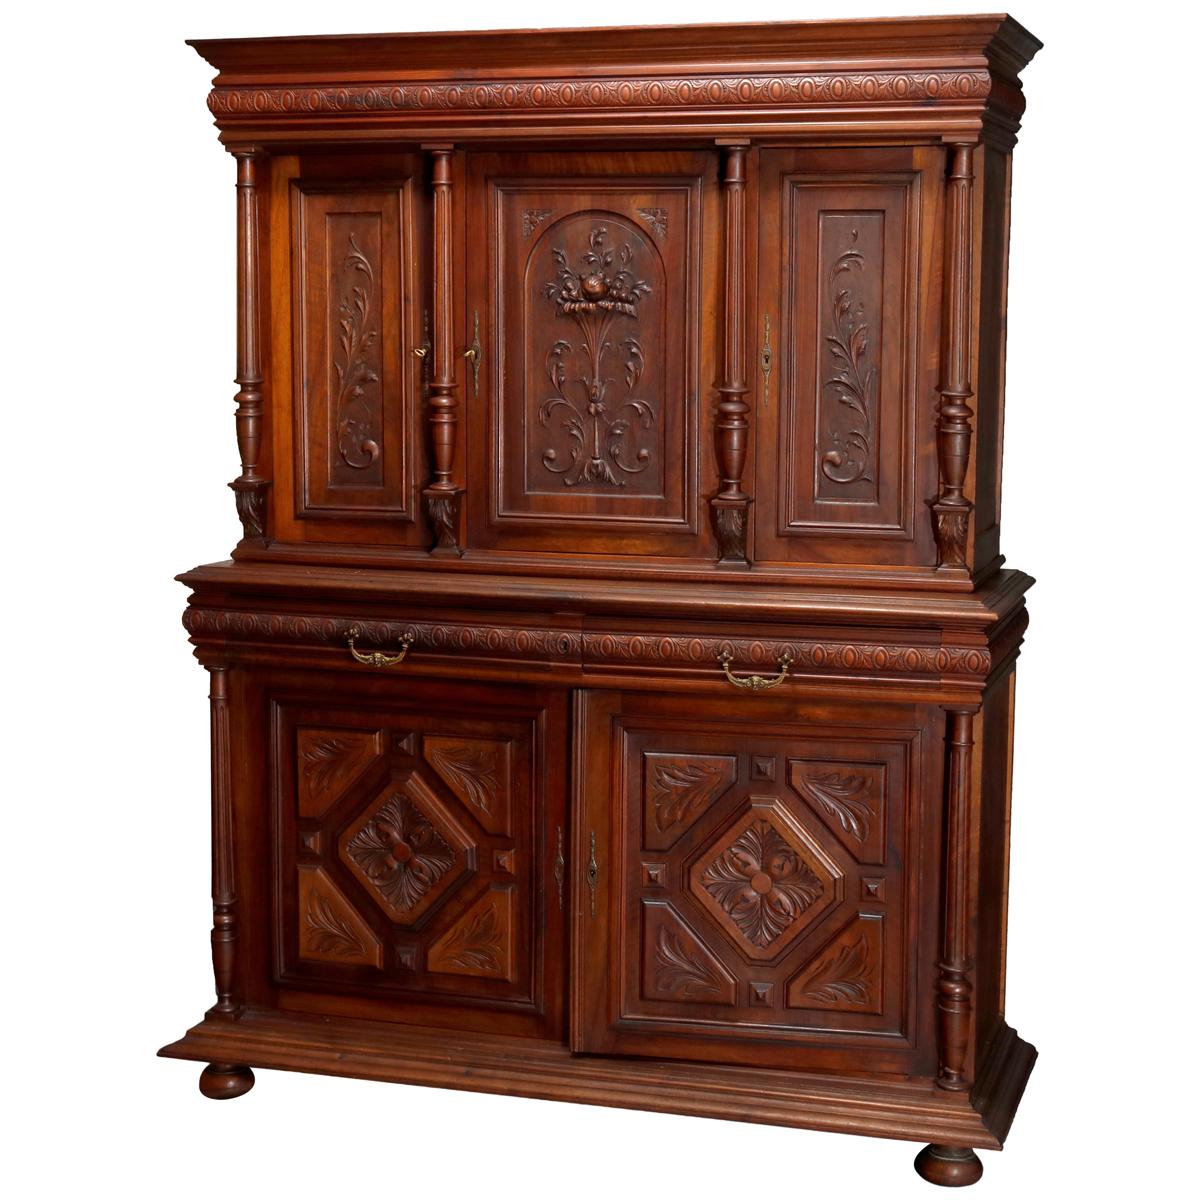 Antique French Renaissance Deeply Carved Walnut Cupboard, 19th Century